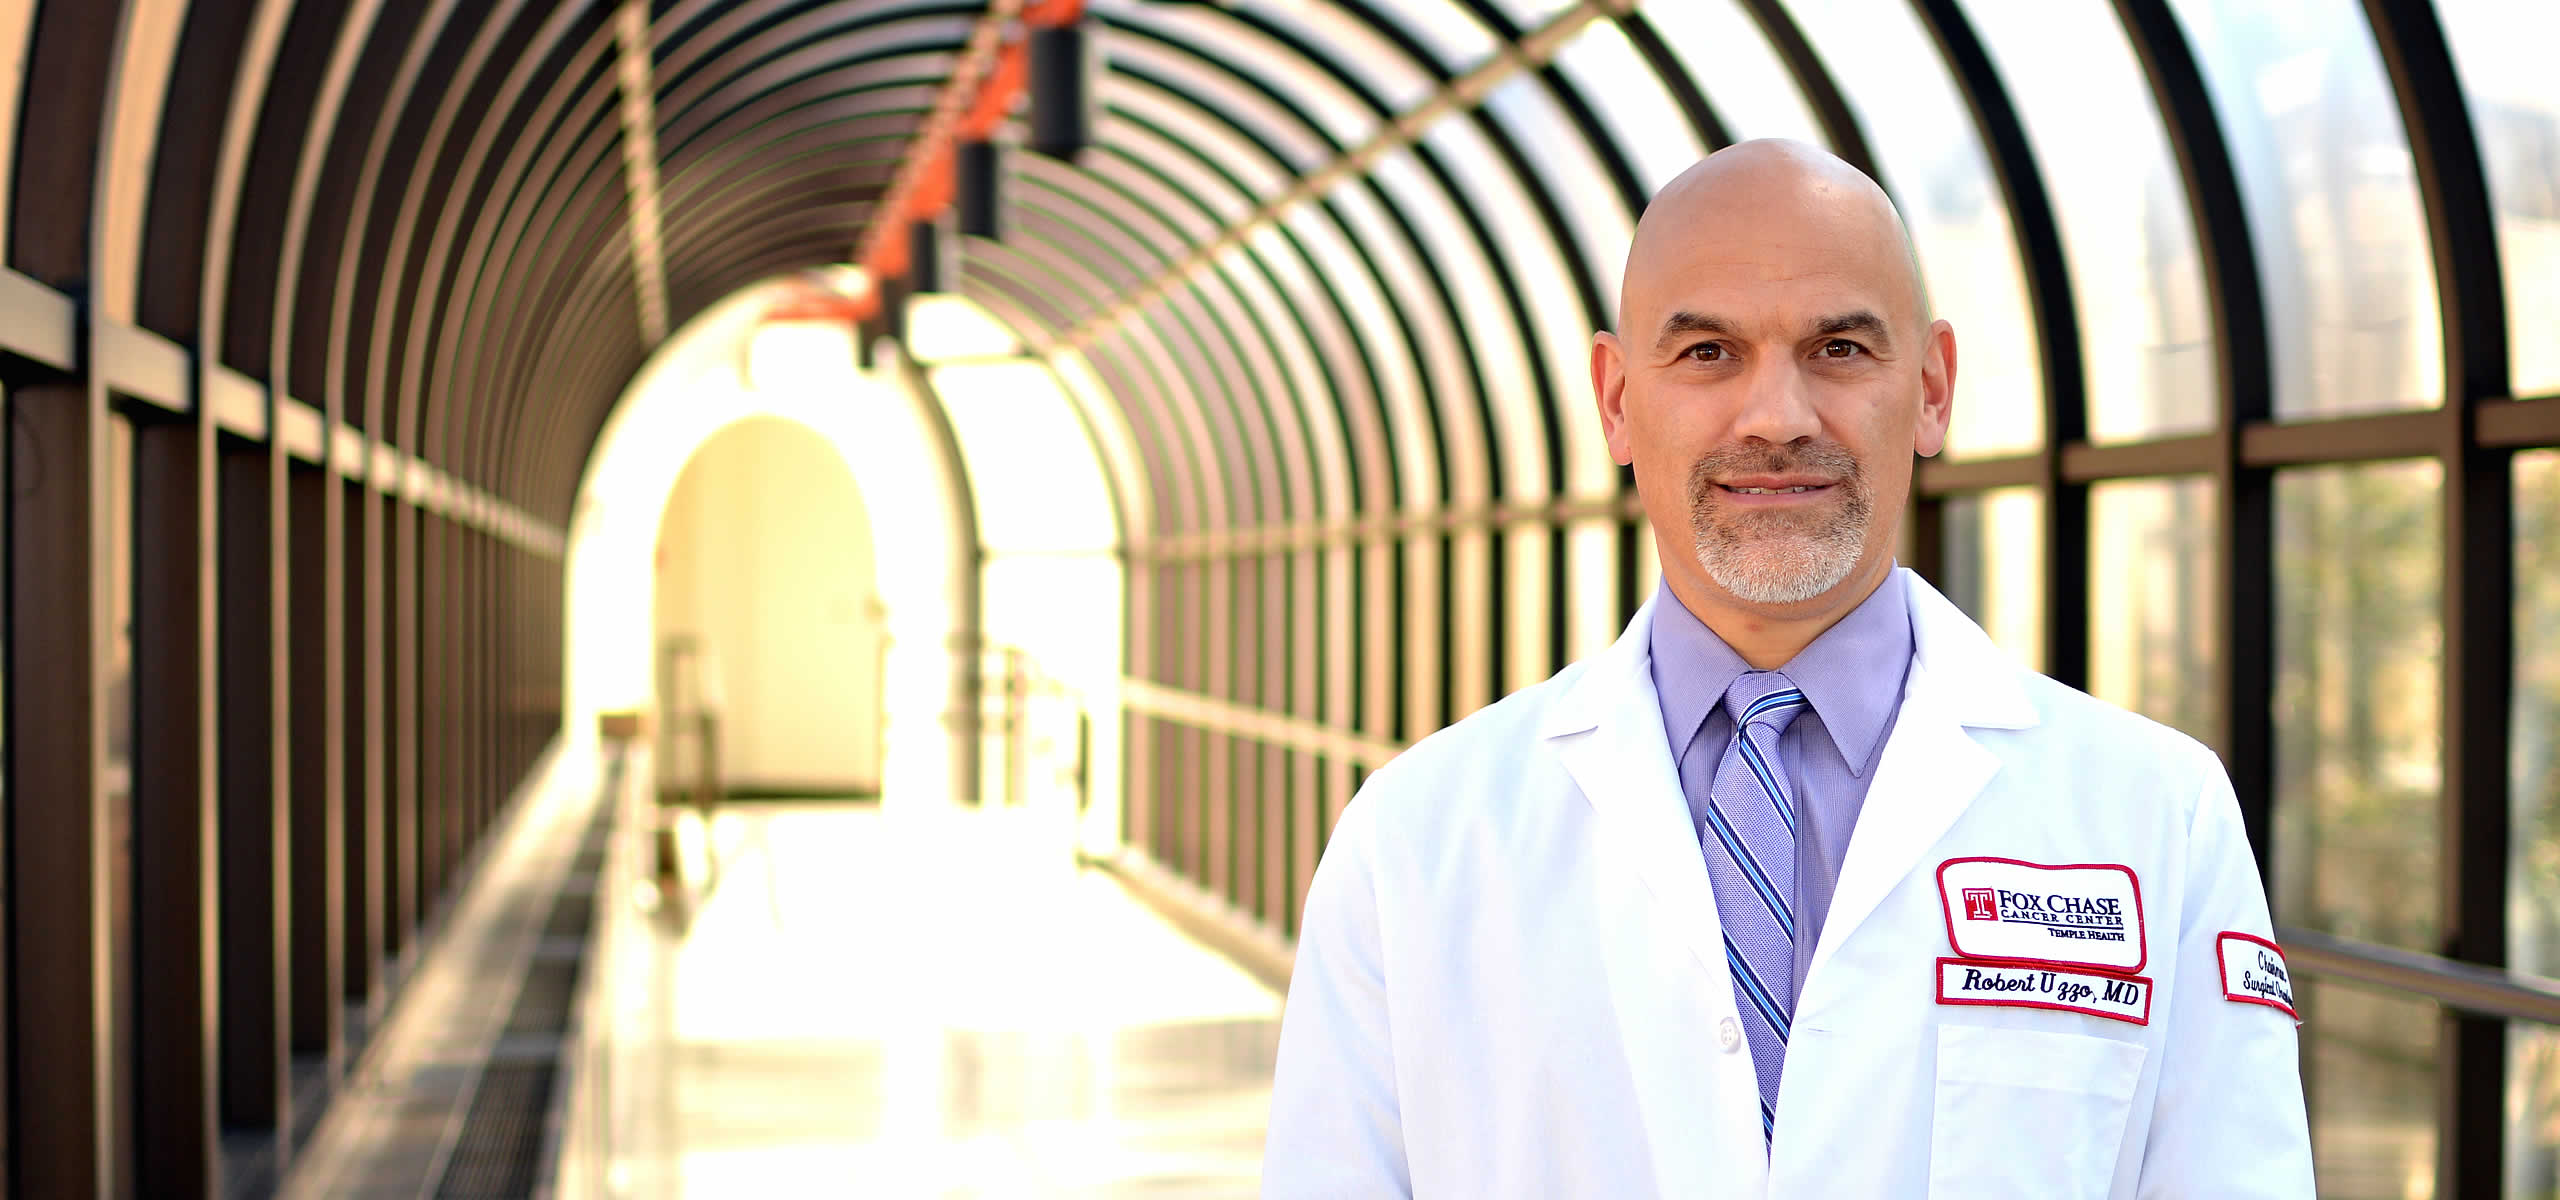 A portrait shot of Dr. Robert Uzzo, standing on the right side of the frame in a blurry hallway with lots of windows.